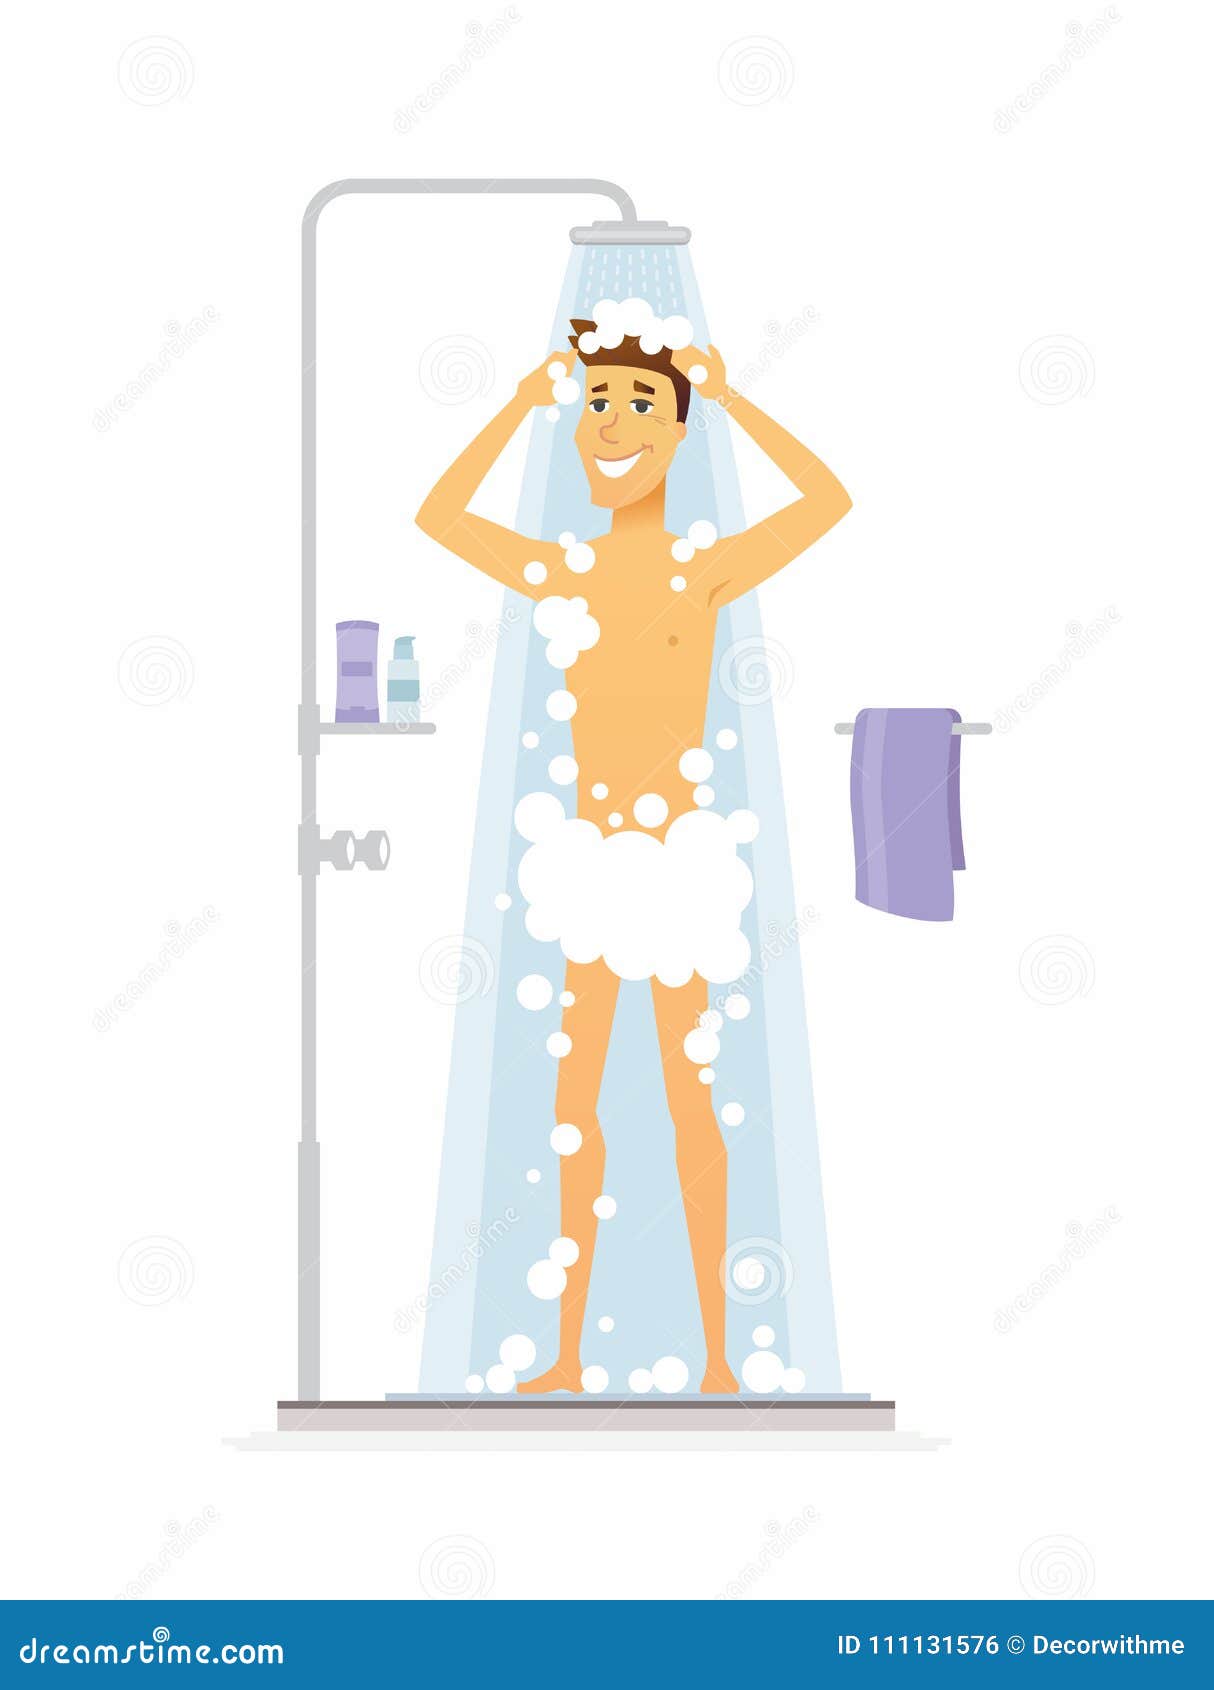 Young Man Taking a Shower - Cartoon People Character Isolated ...